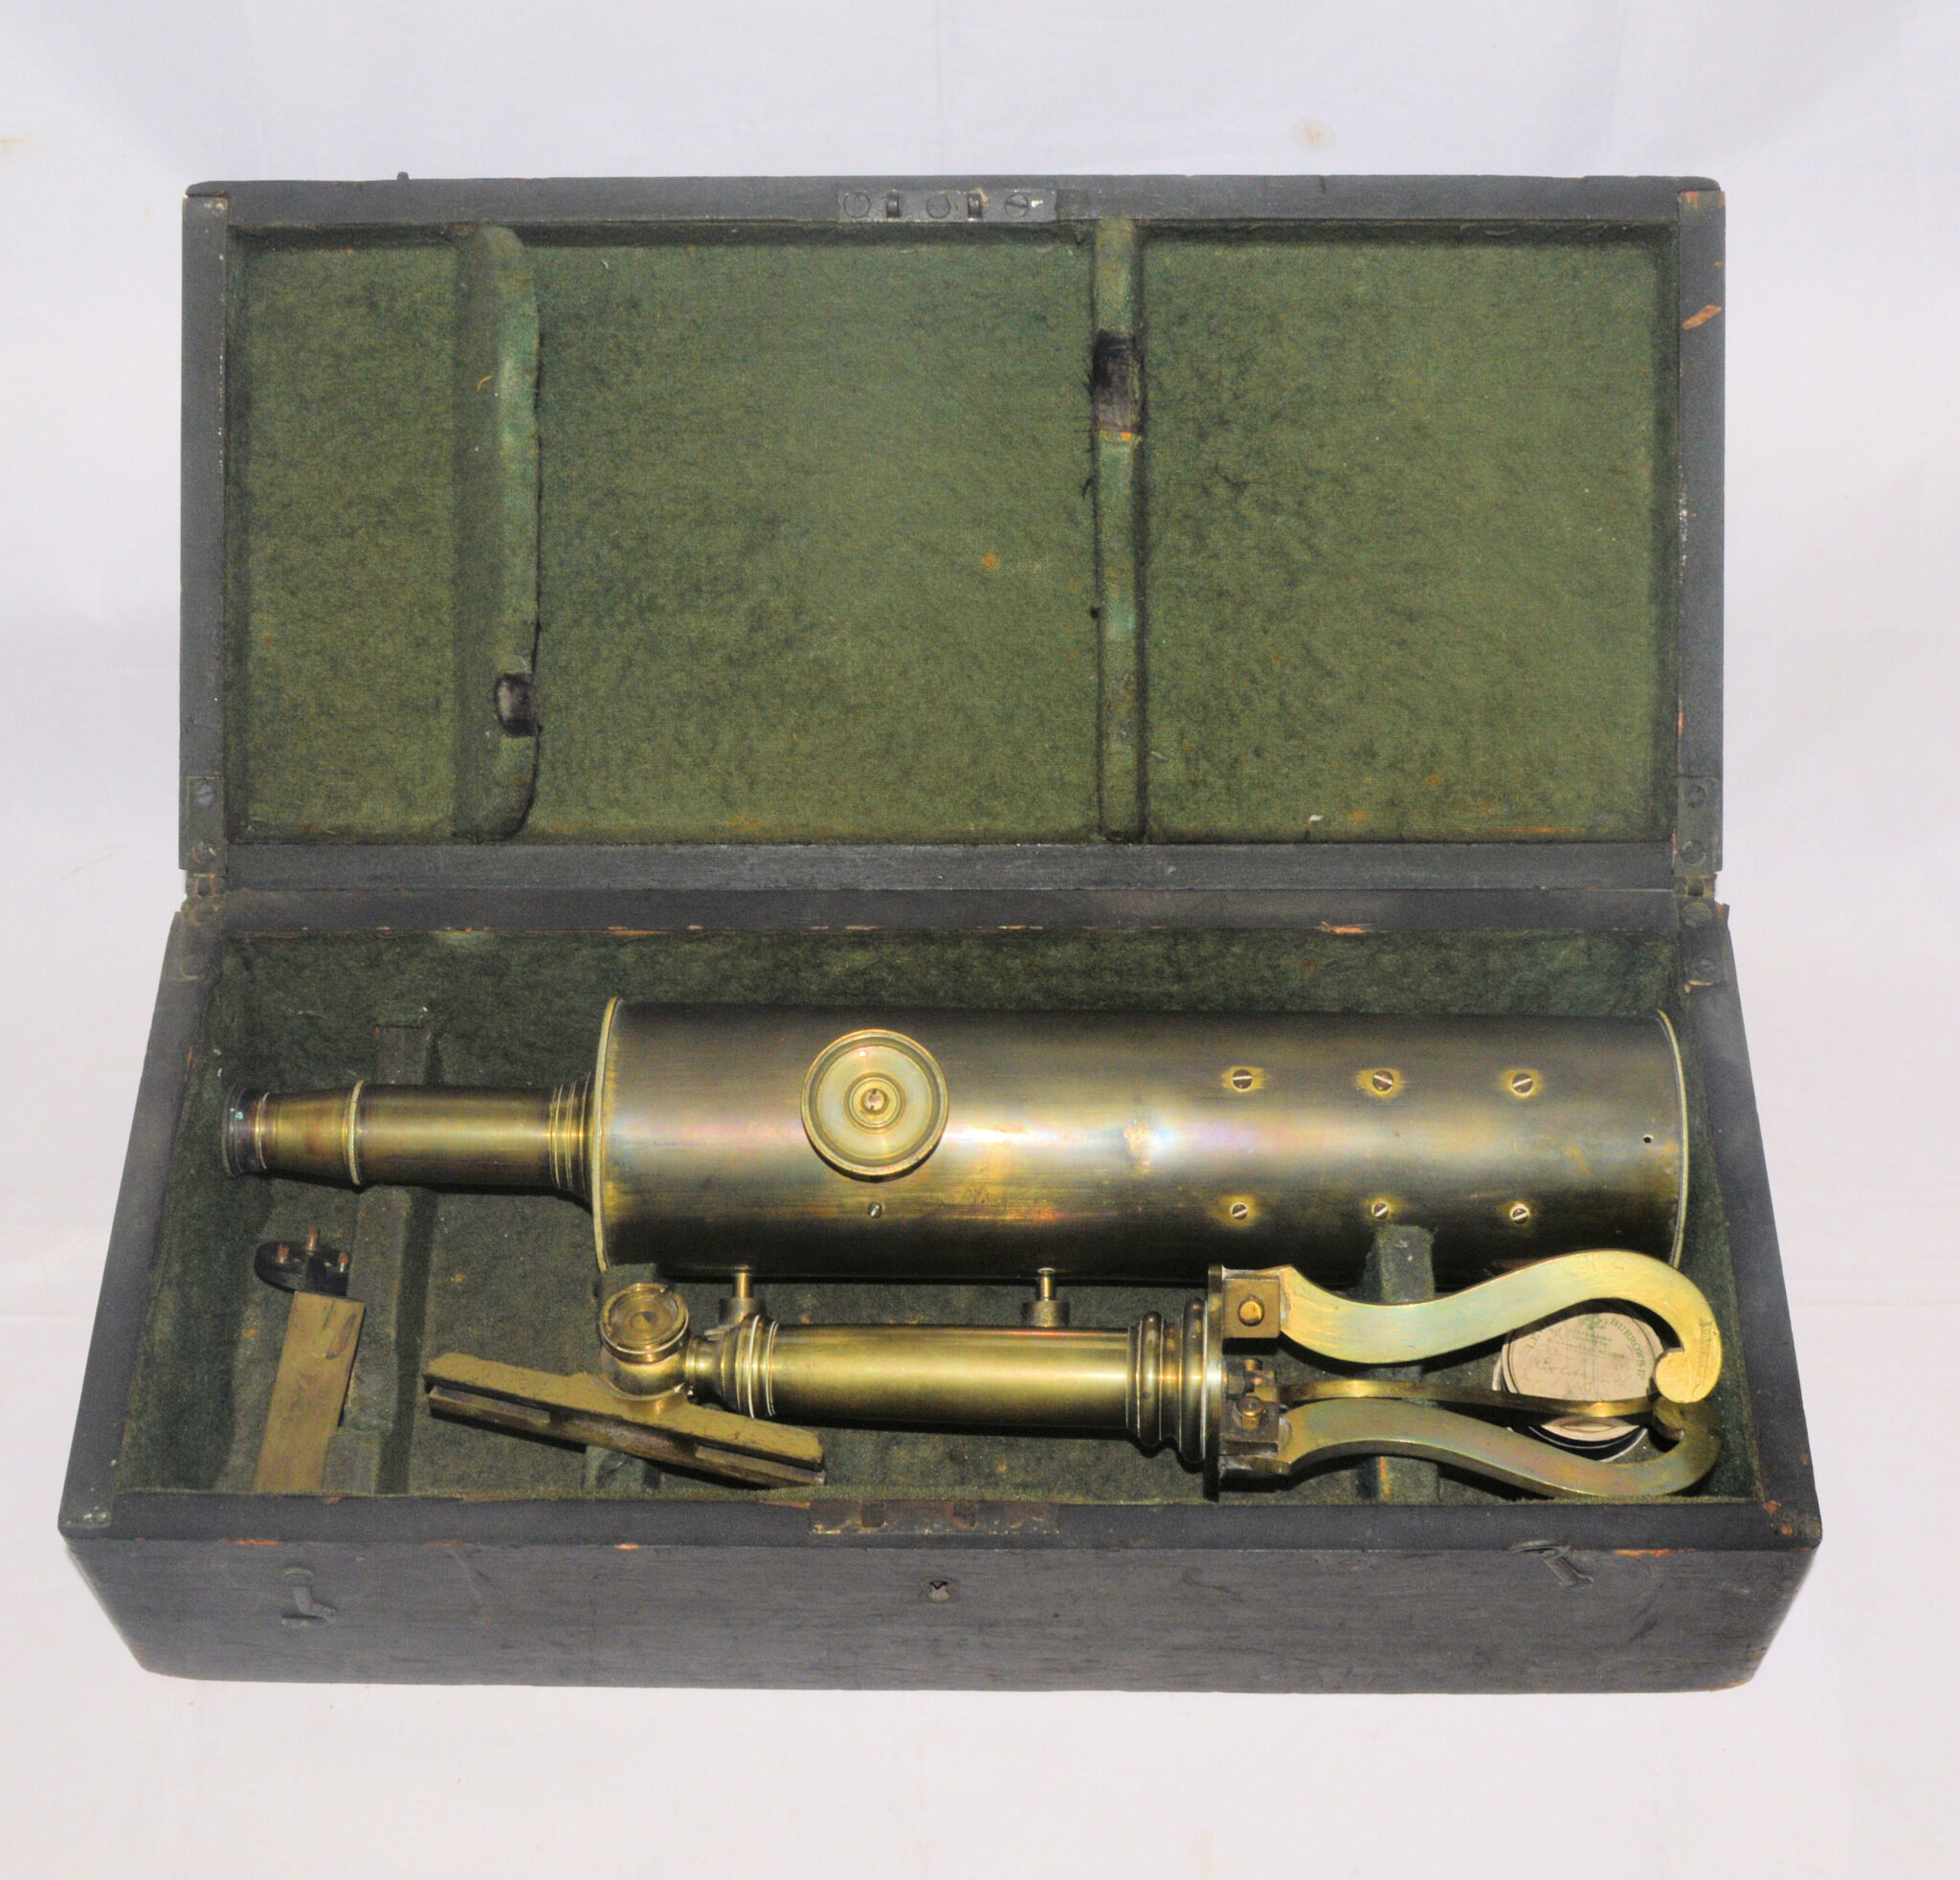 SOLD – Brass 3.5 inch reflecting telescope in case.